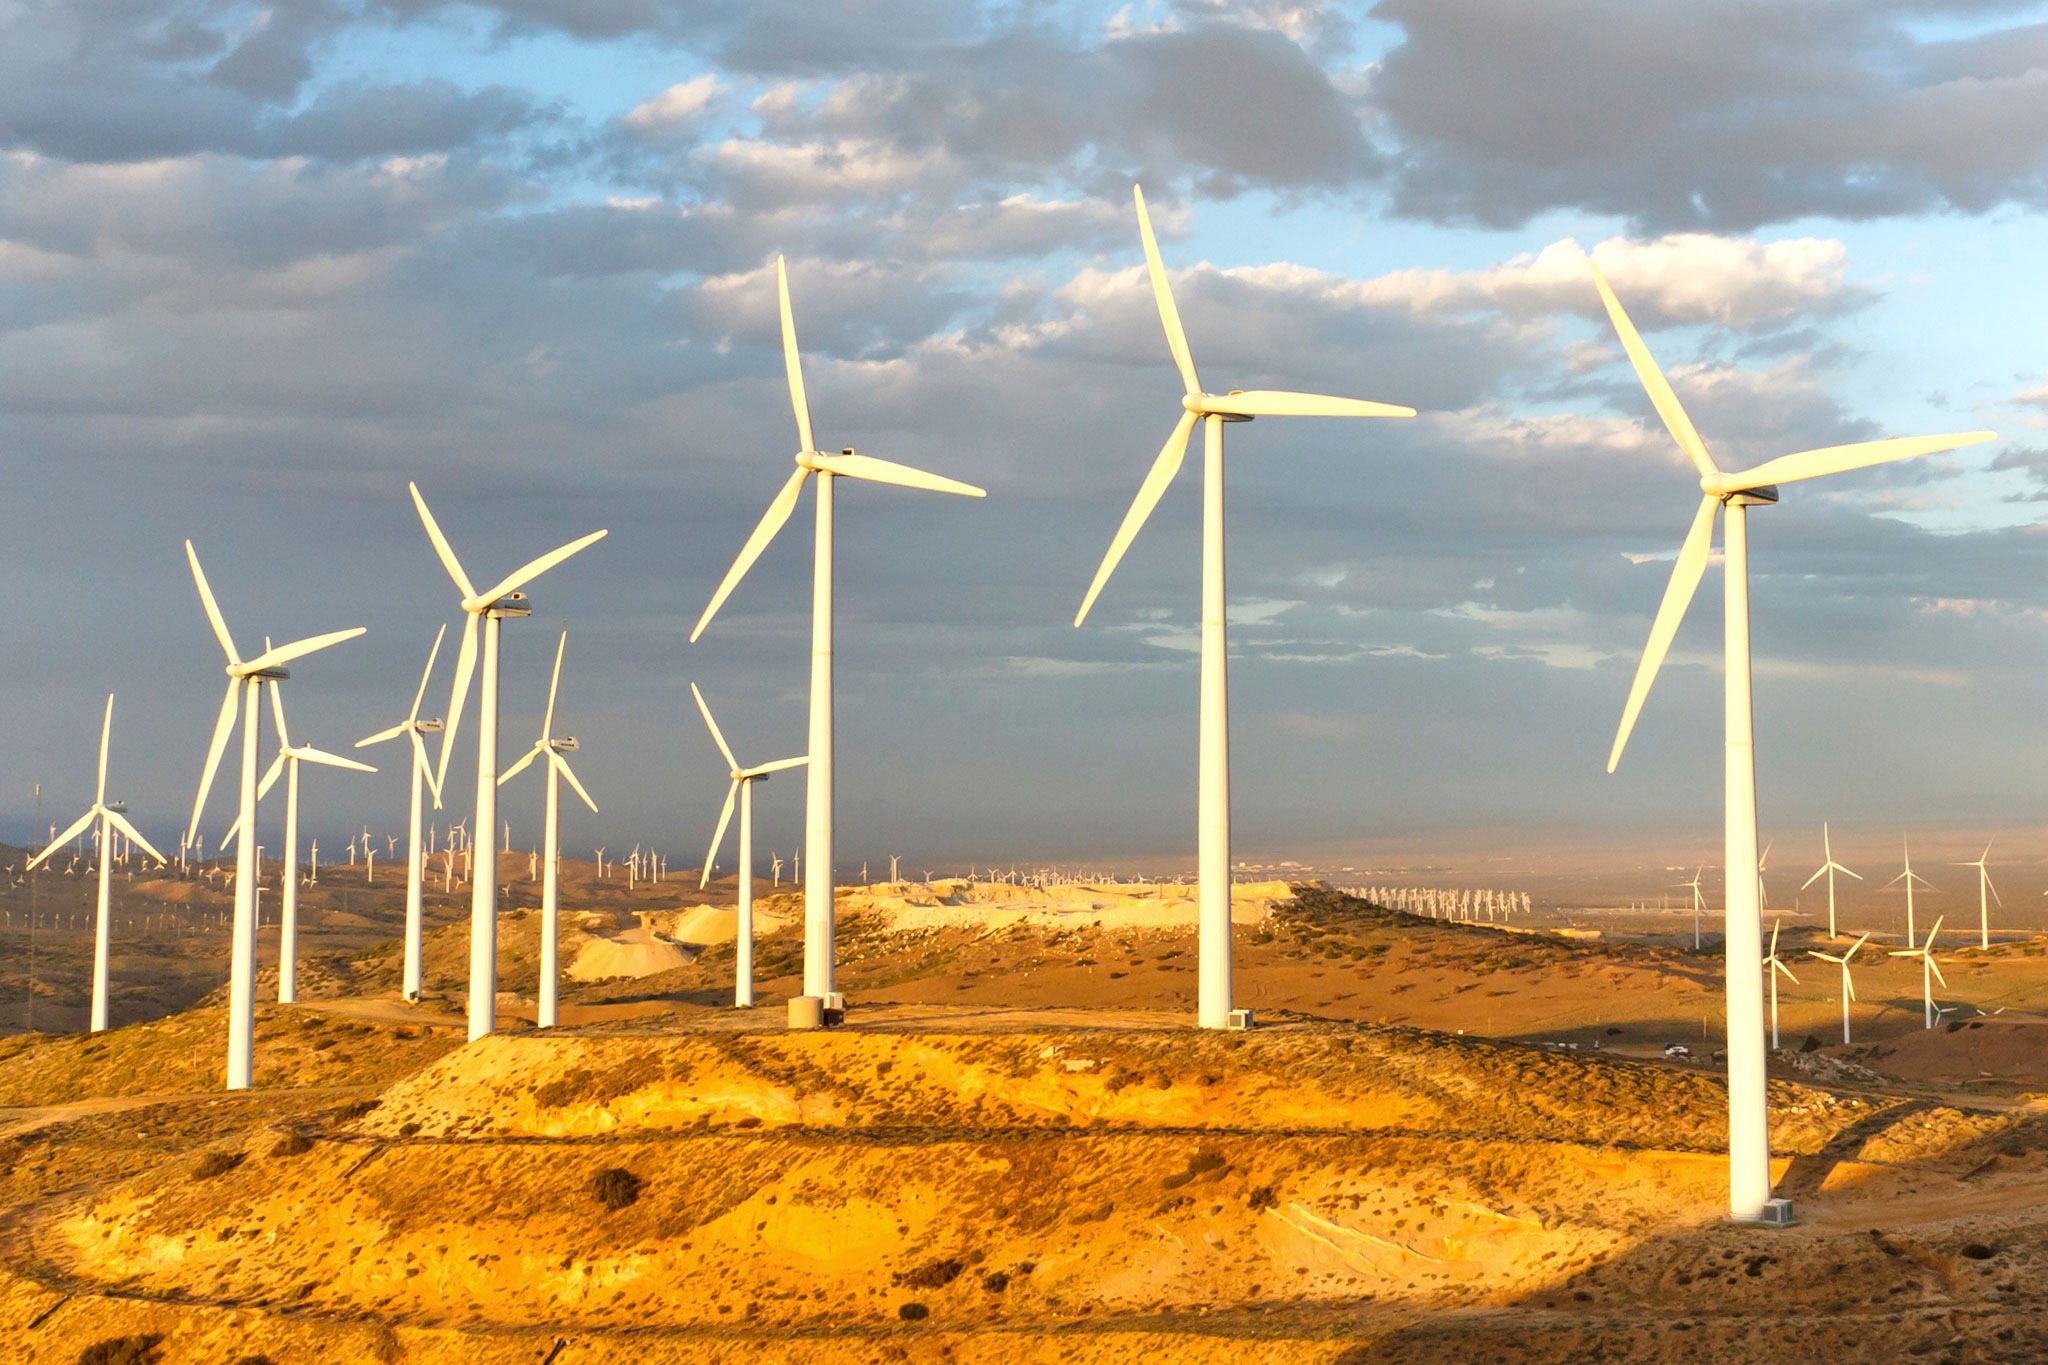 Using Alternative Energy to Power your Home #WindPower